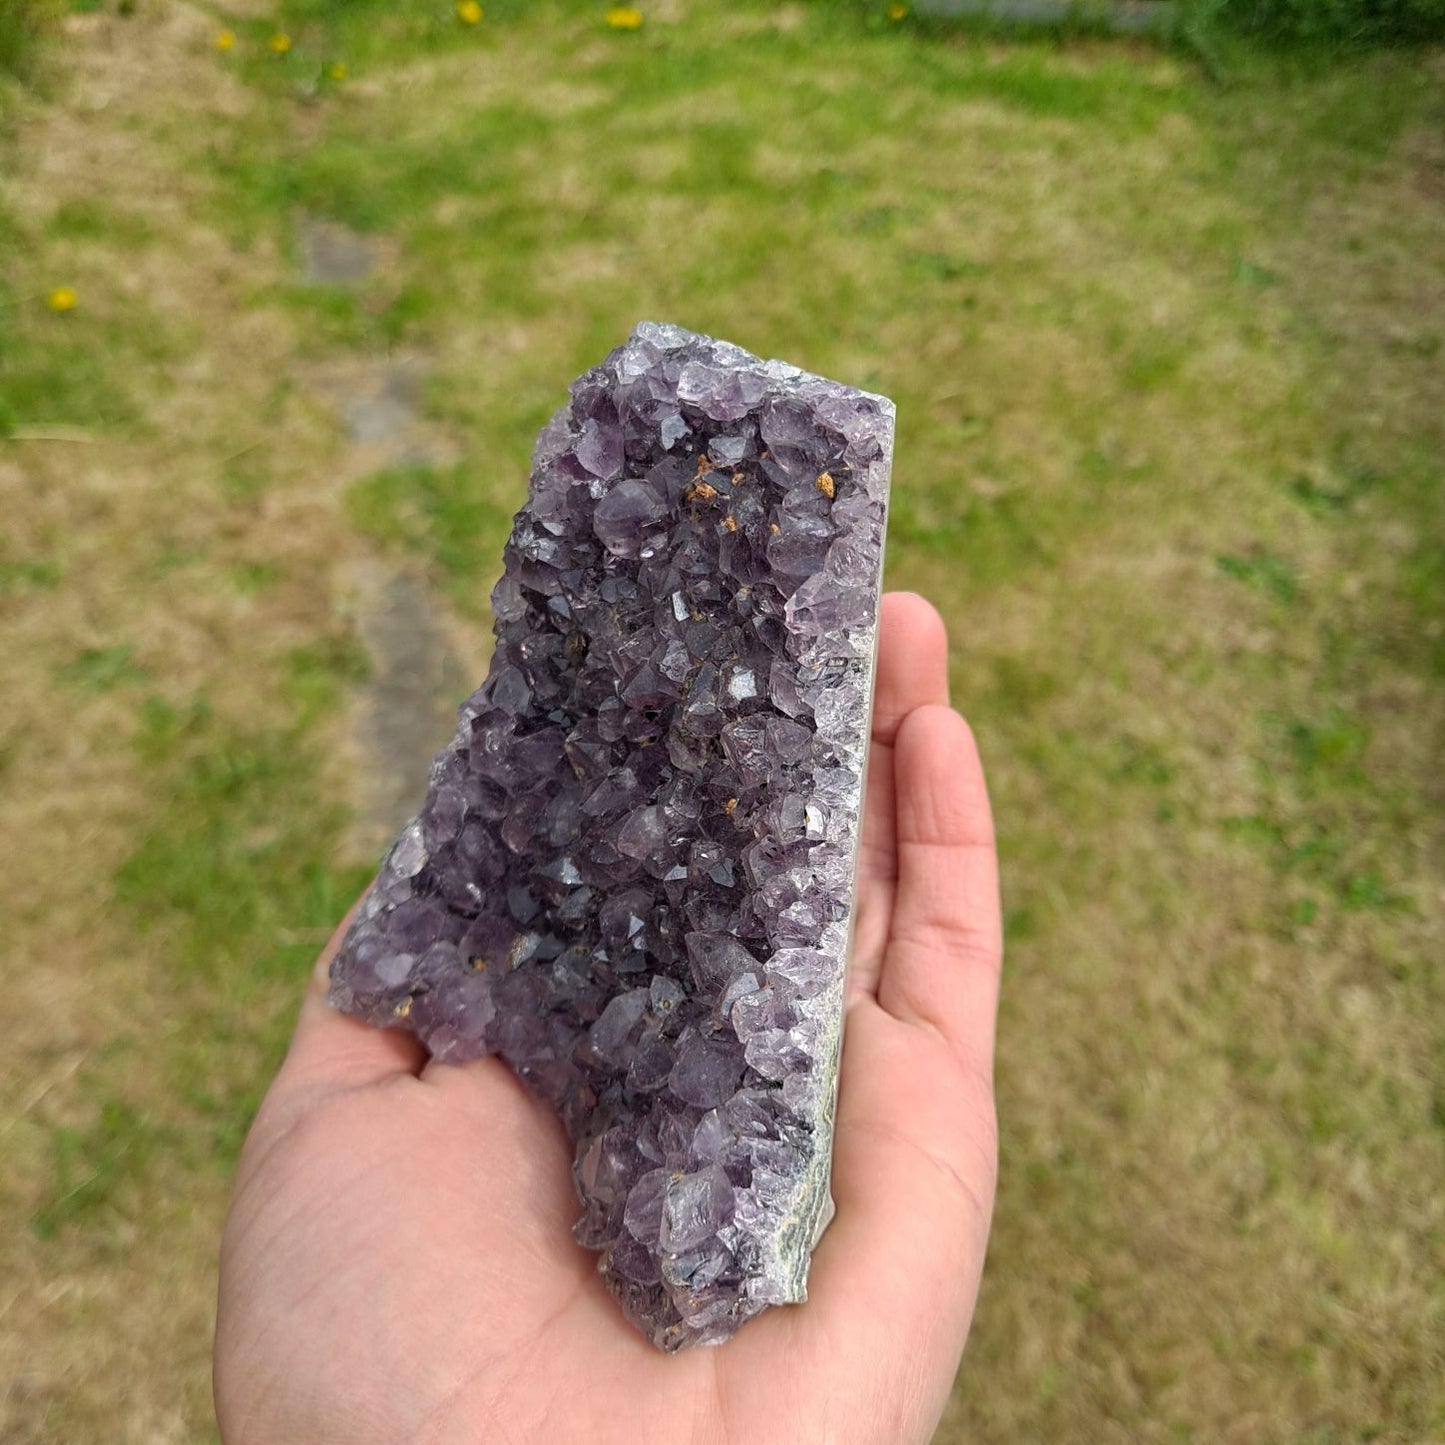 Dumi's Crystals | Amethyst Cluster (Portable, 8.9cm) in meditation | Close your eyes and hold this Amethyst Cluster (8.9 x 6.3 x 8.9cm) during meditation. Amethyst is believed to enhance focus, clarity, and spiritual connection.